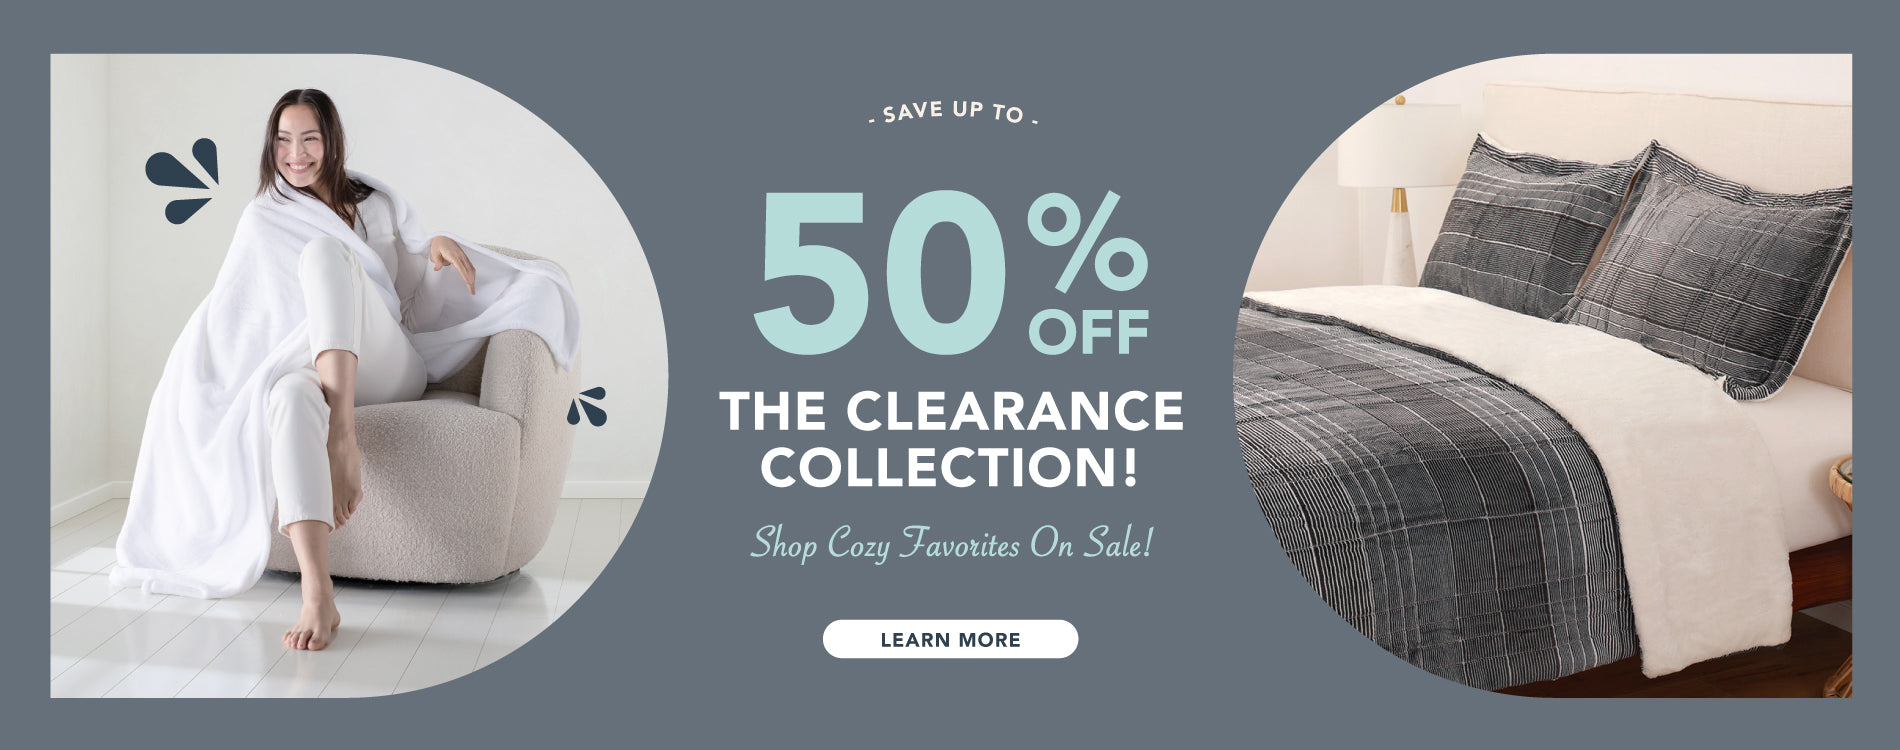 Save Up To 50% OFF The Clearance Collection